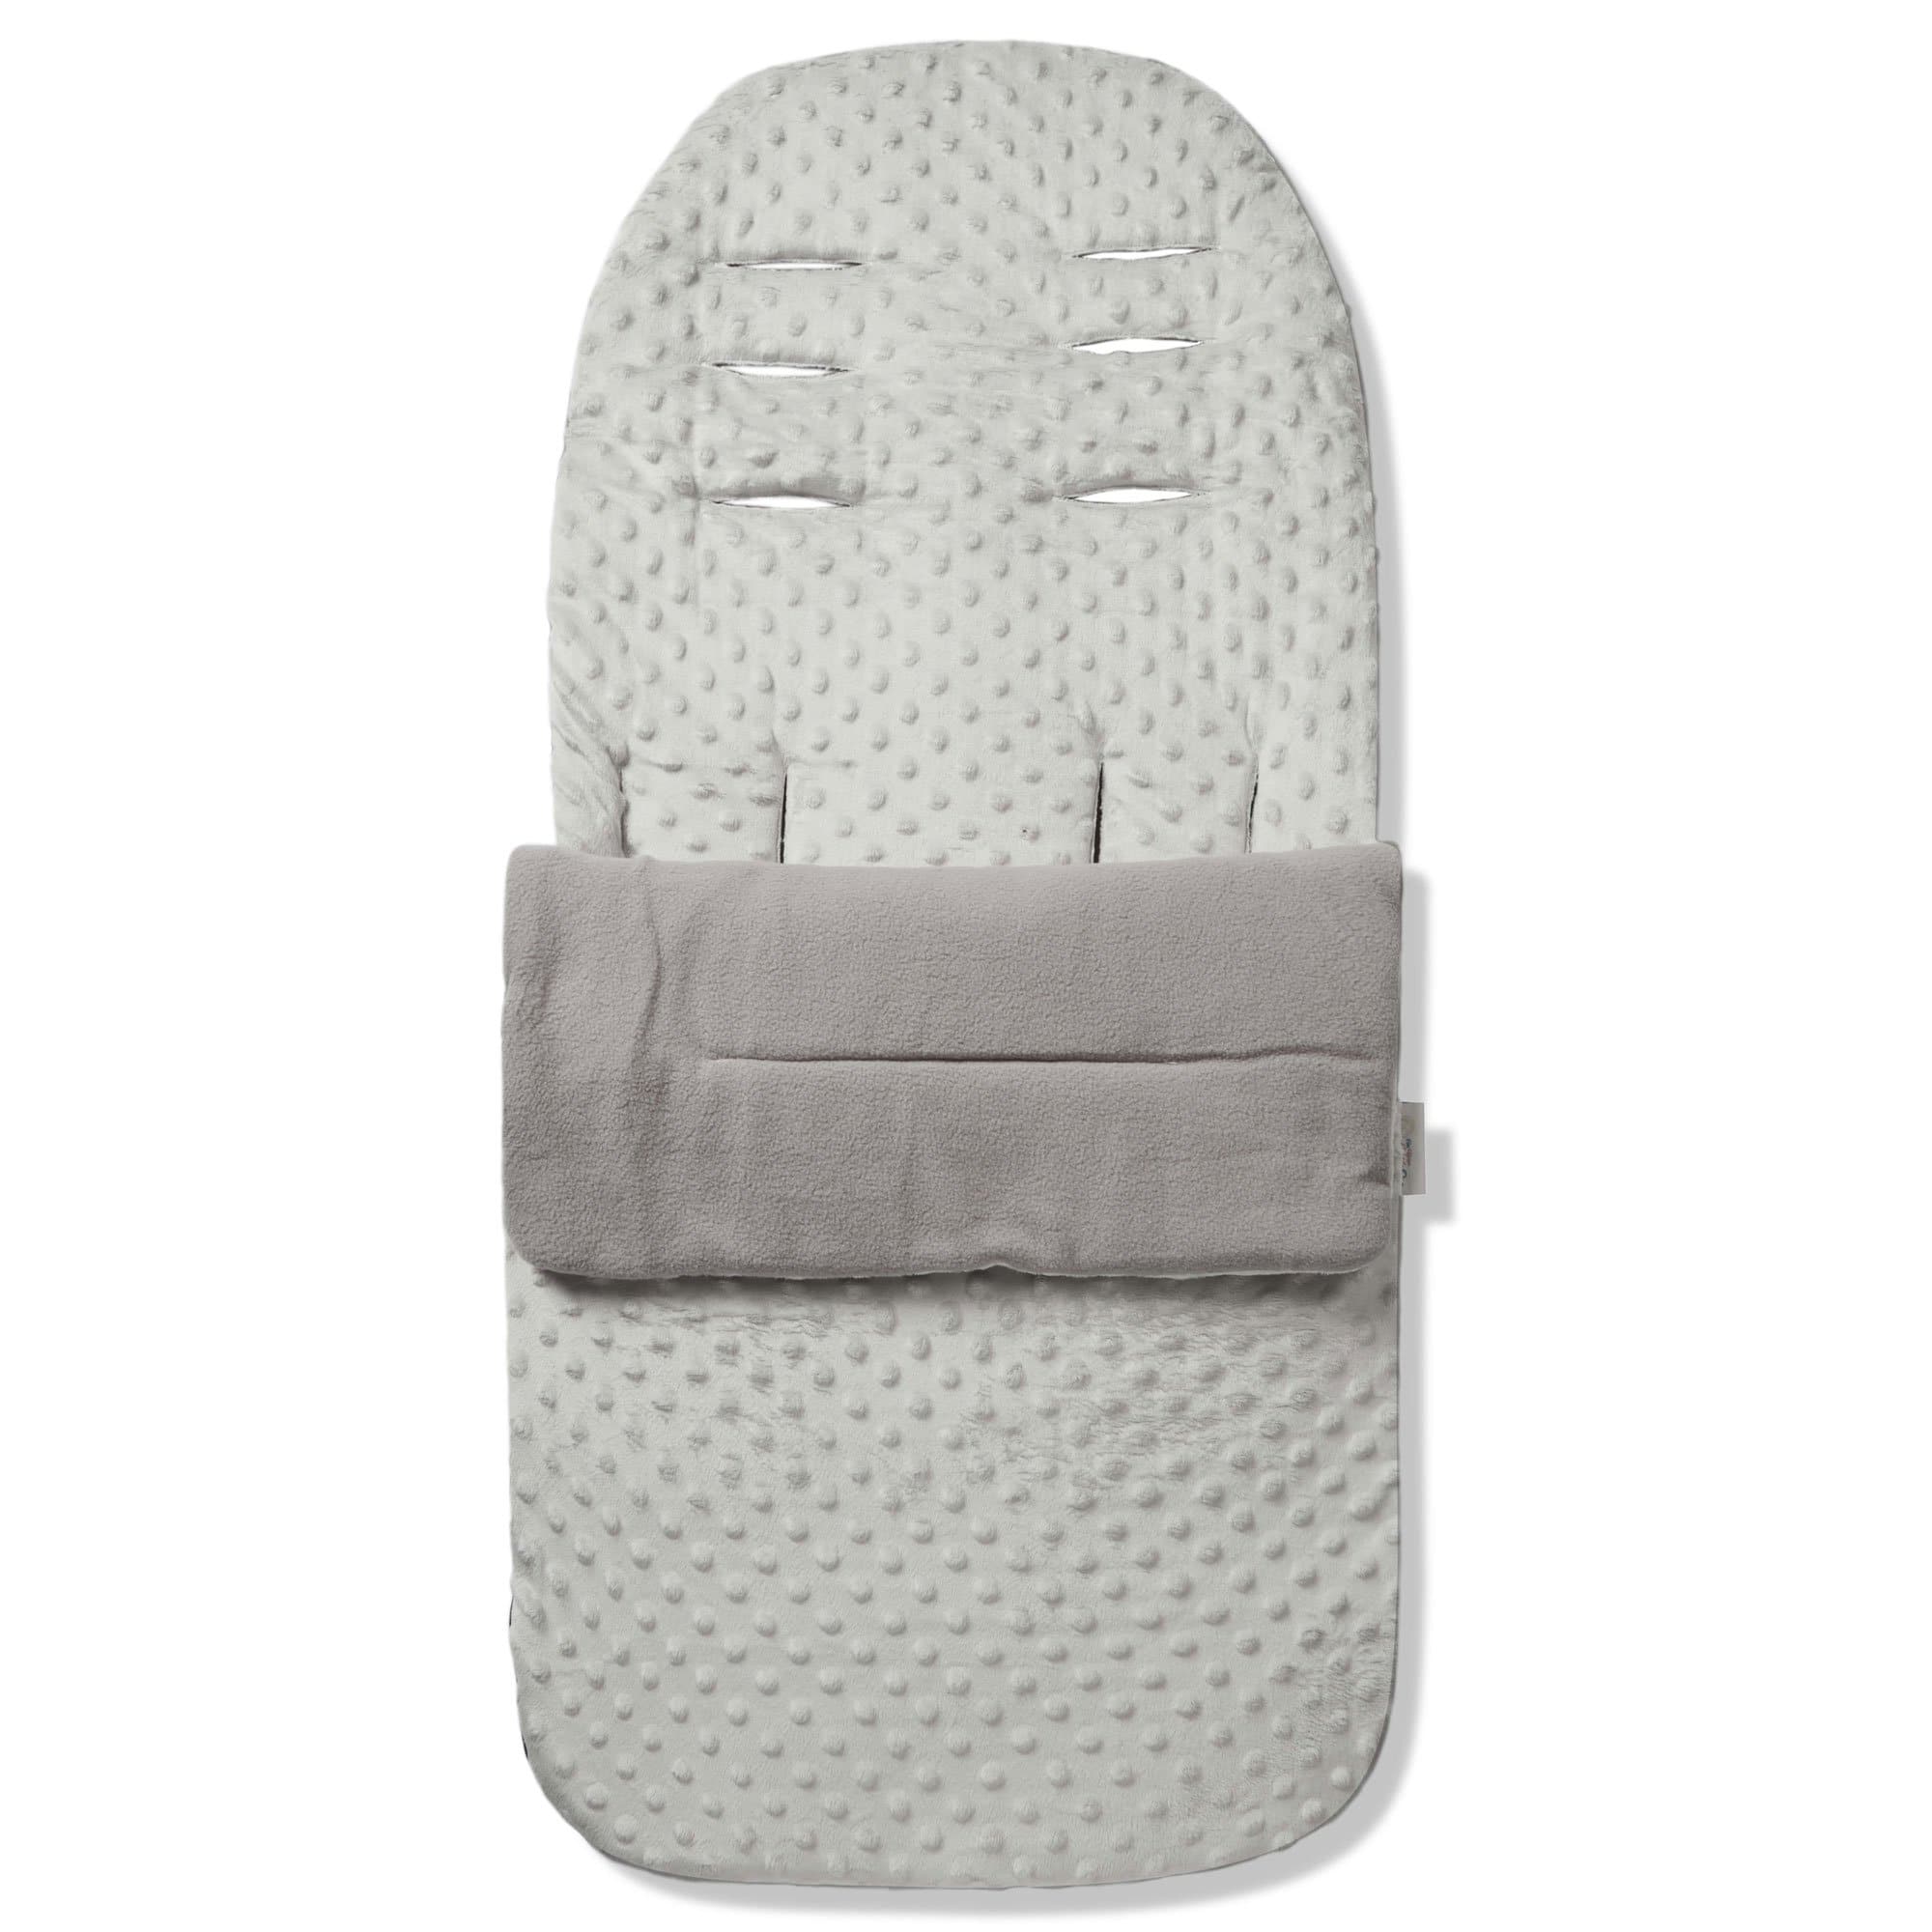 Dimple Footmuff / Cosy Toes Compatible with Gesslein - Grey / Fits All Models | For Your Little One